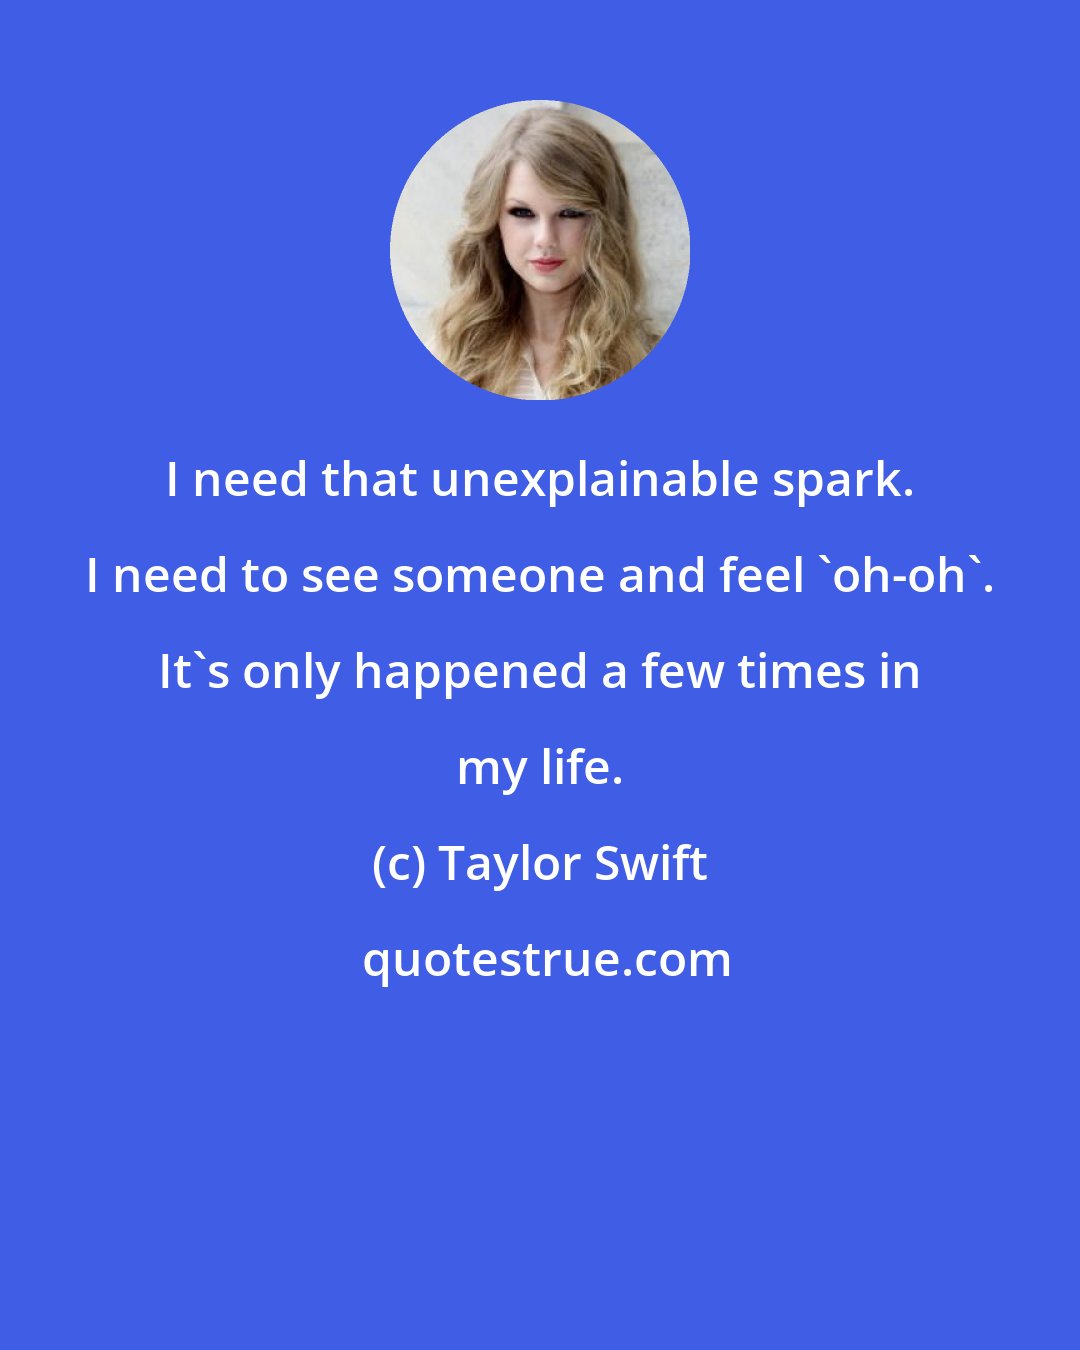 Taylor Swift: I need that unexplainable spark. I need to see someone and feel 'oh-oh'. It's only happened a few times in my life.